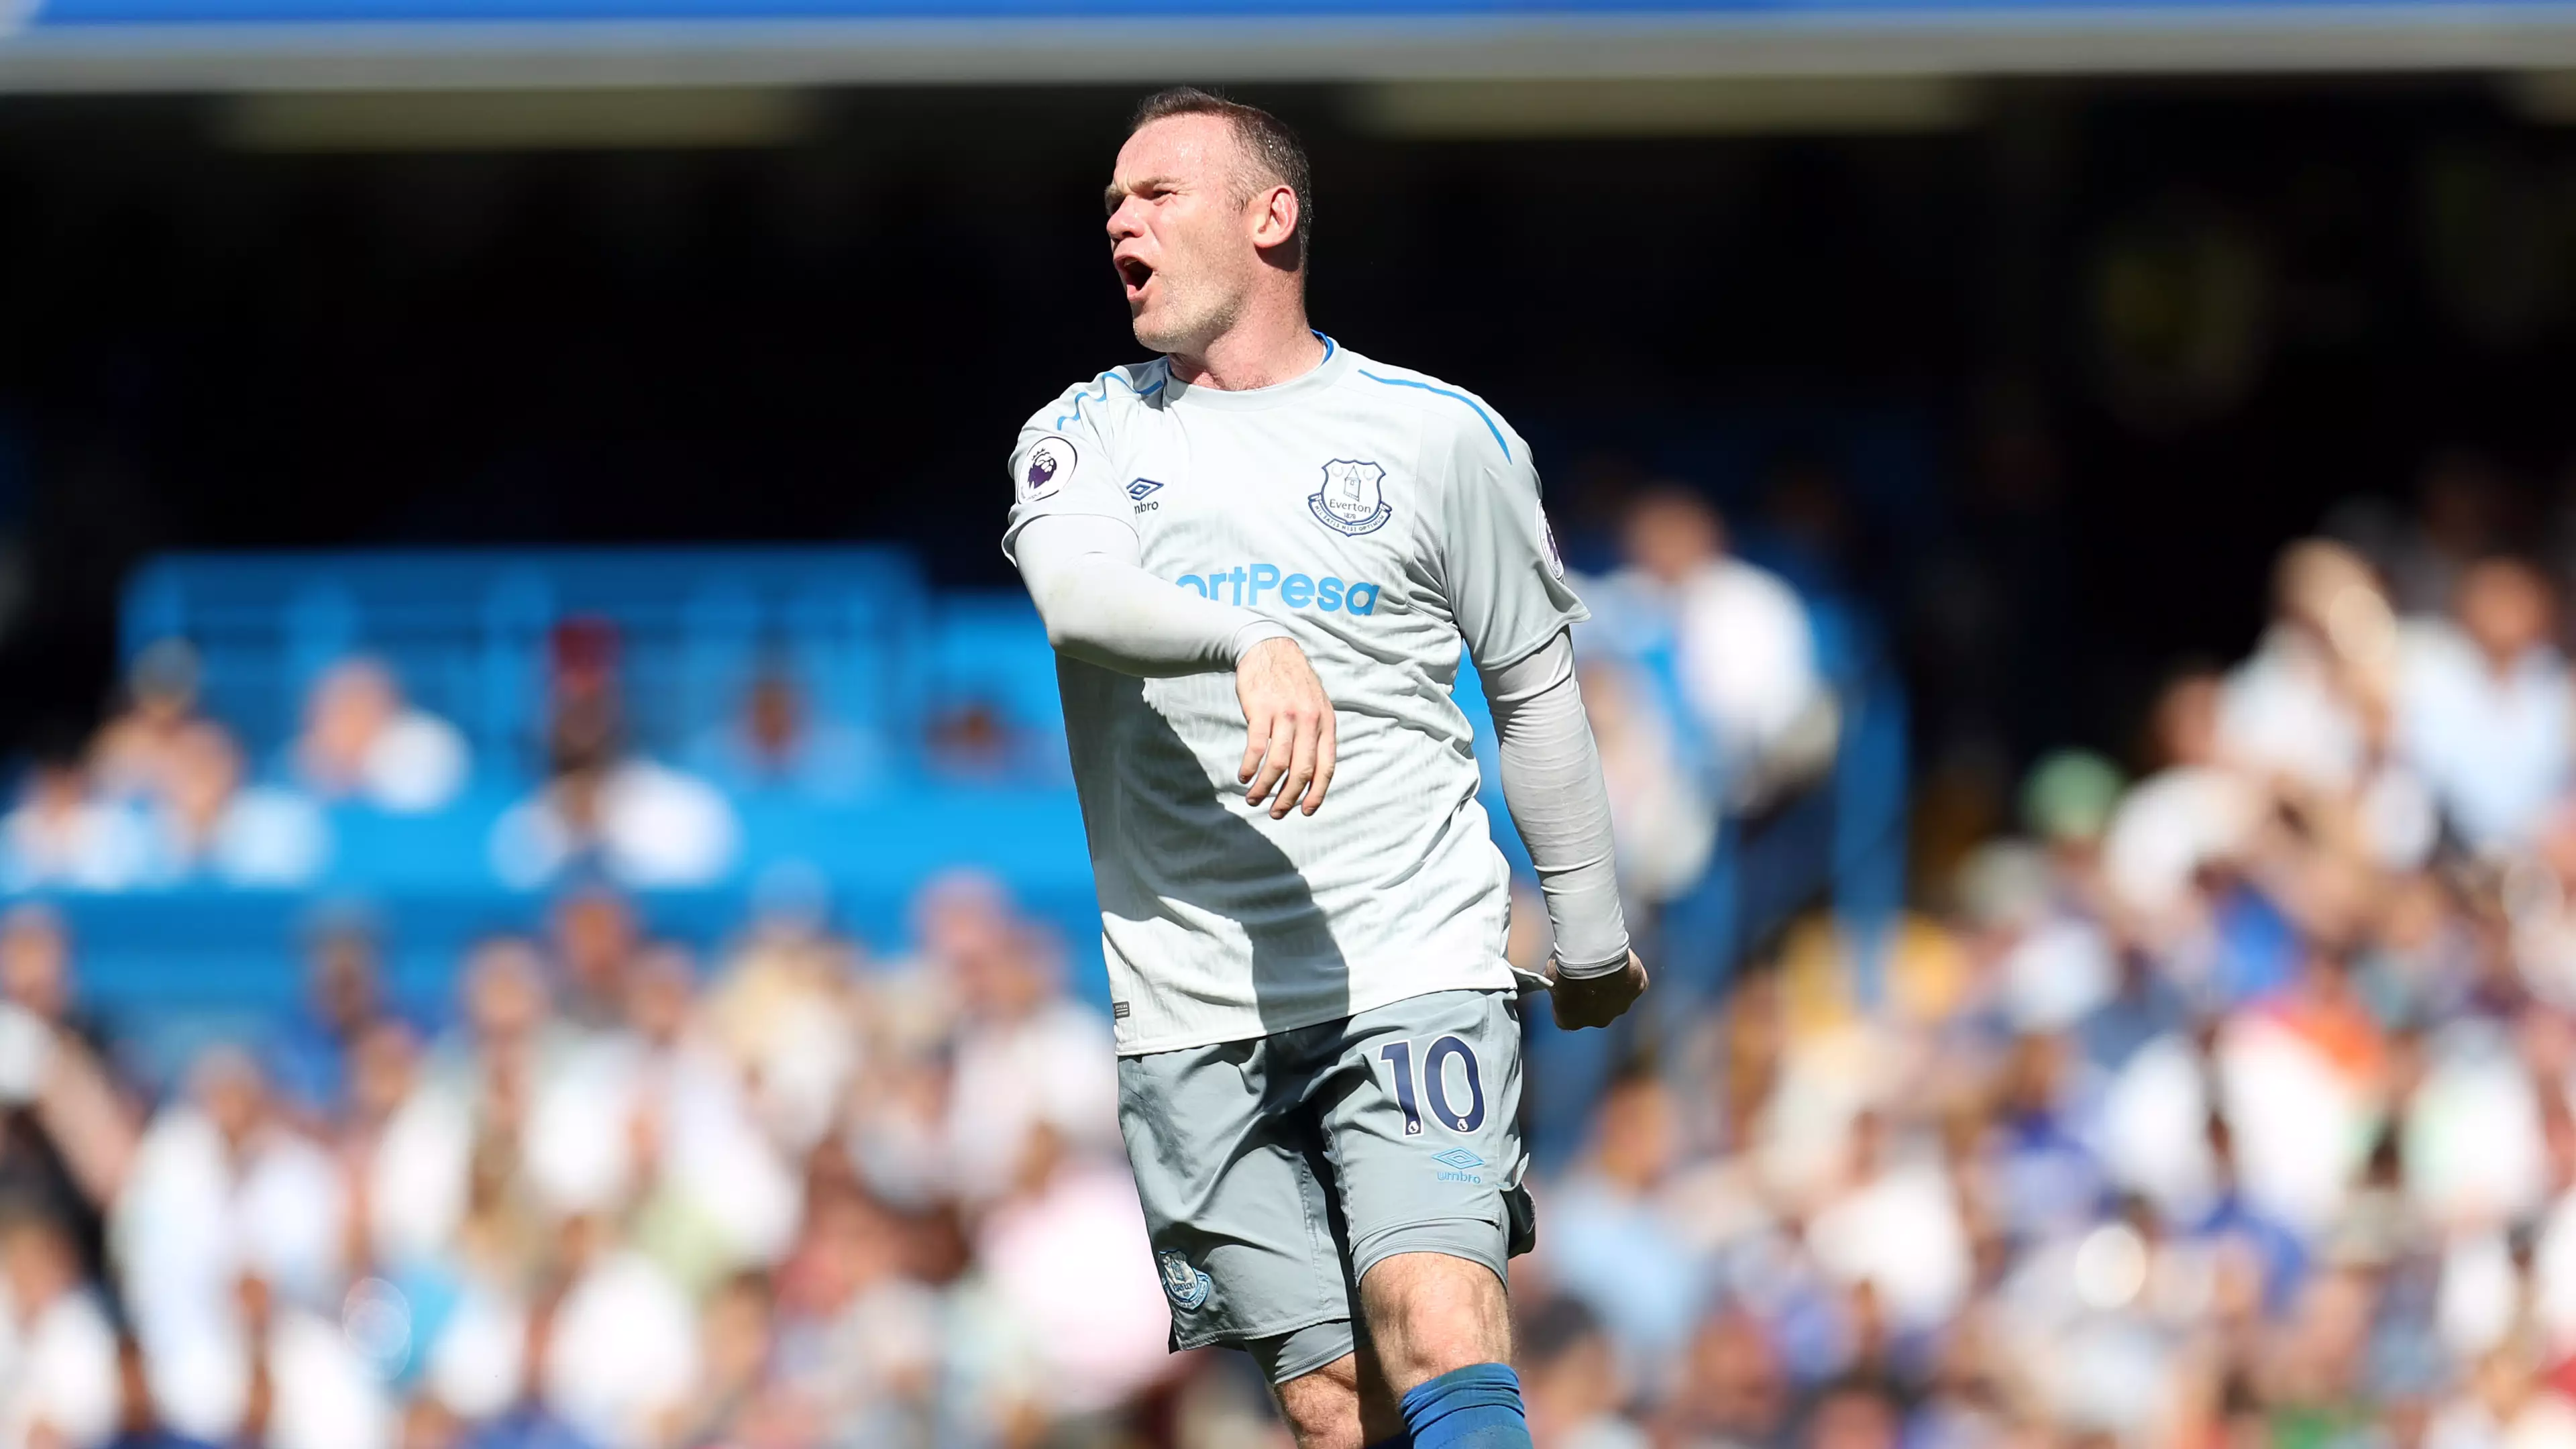 Wayne Rooney's FIFA 18 Rating Highlights His Remarkable Decline